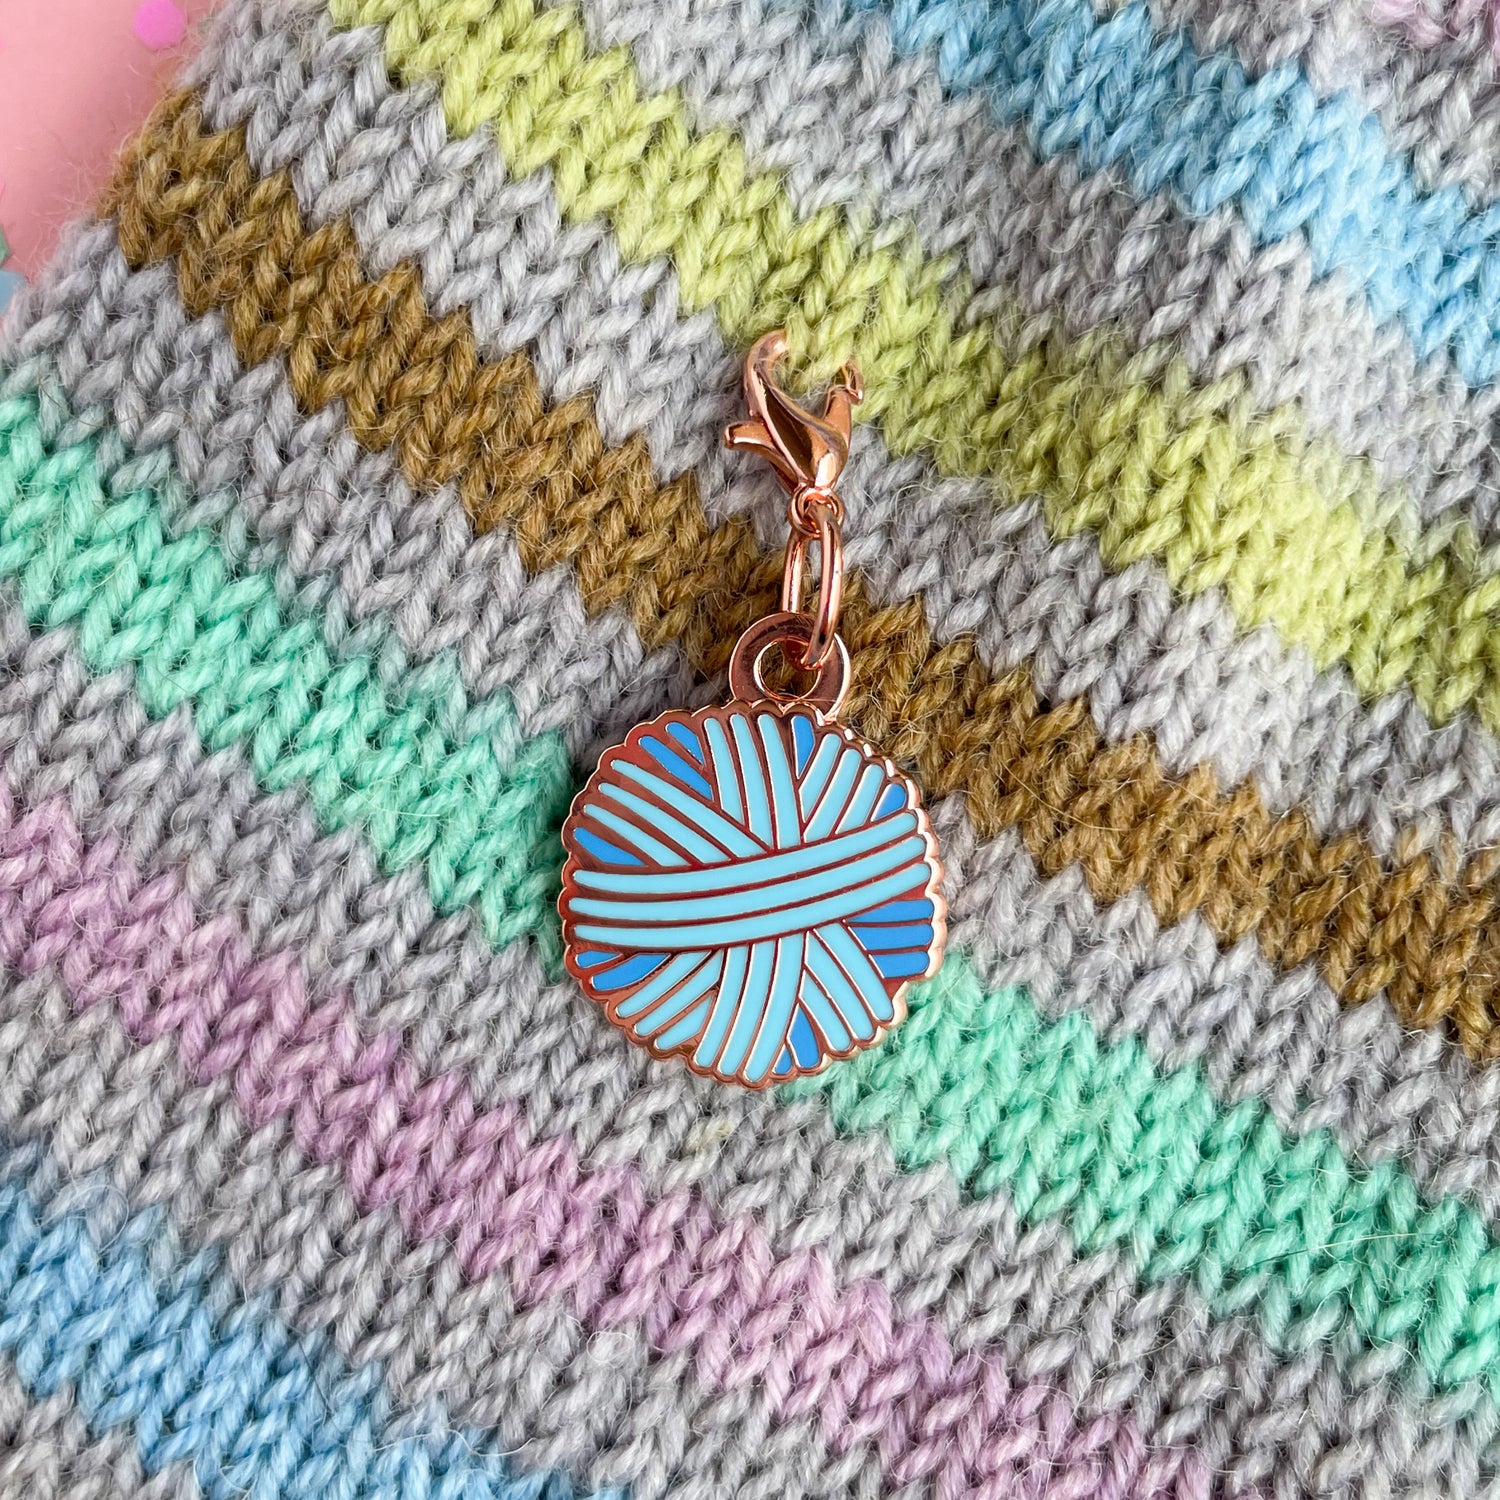 A pastel blue yarn ball charm on a hand knit background.